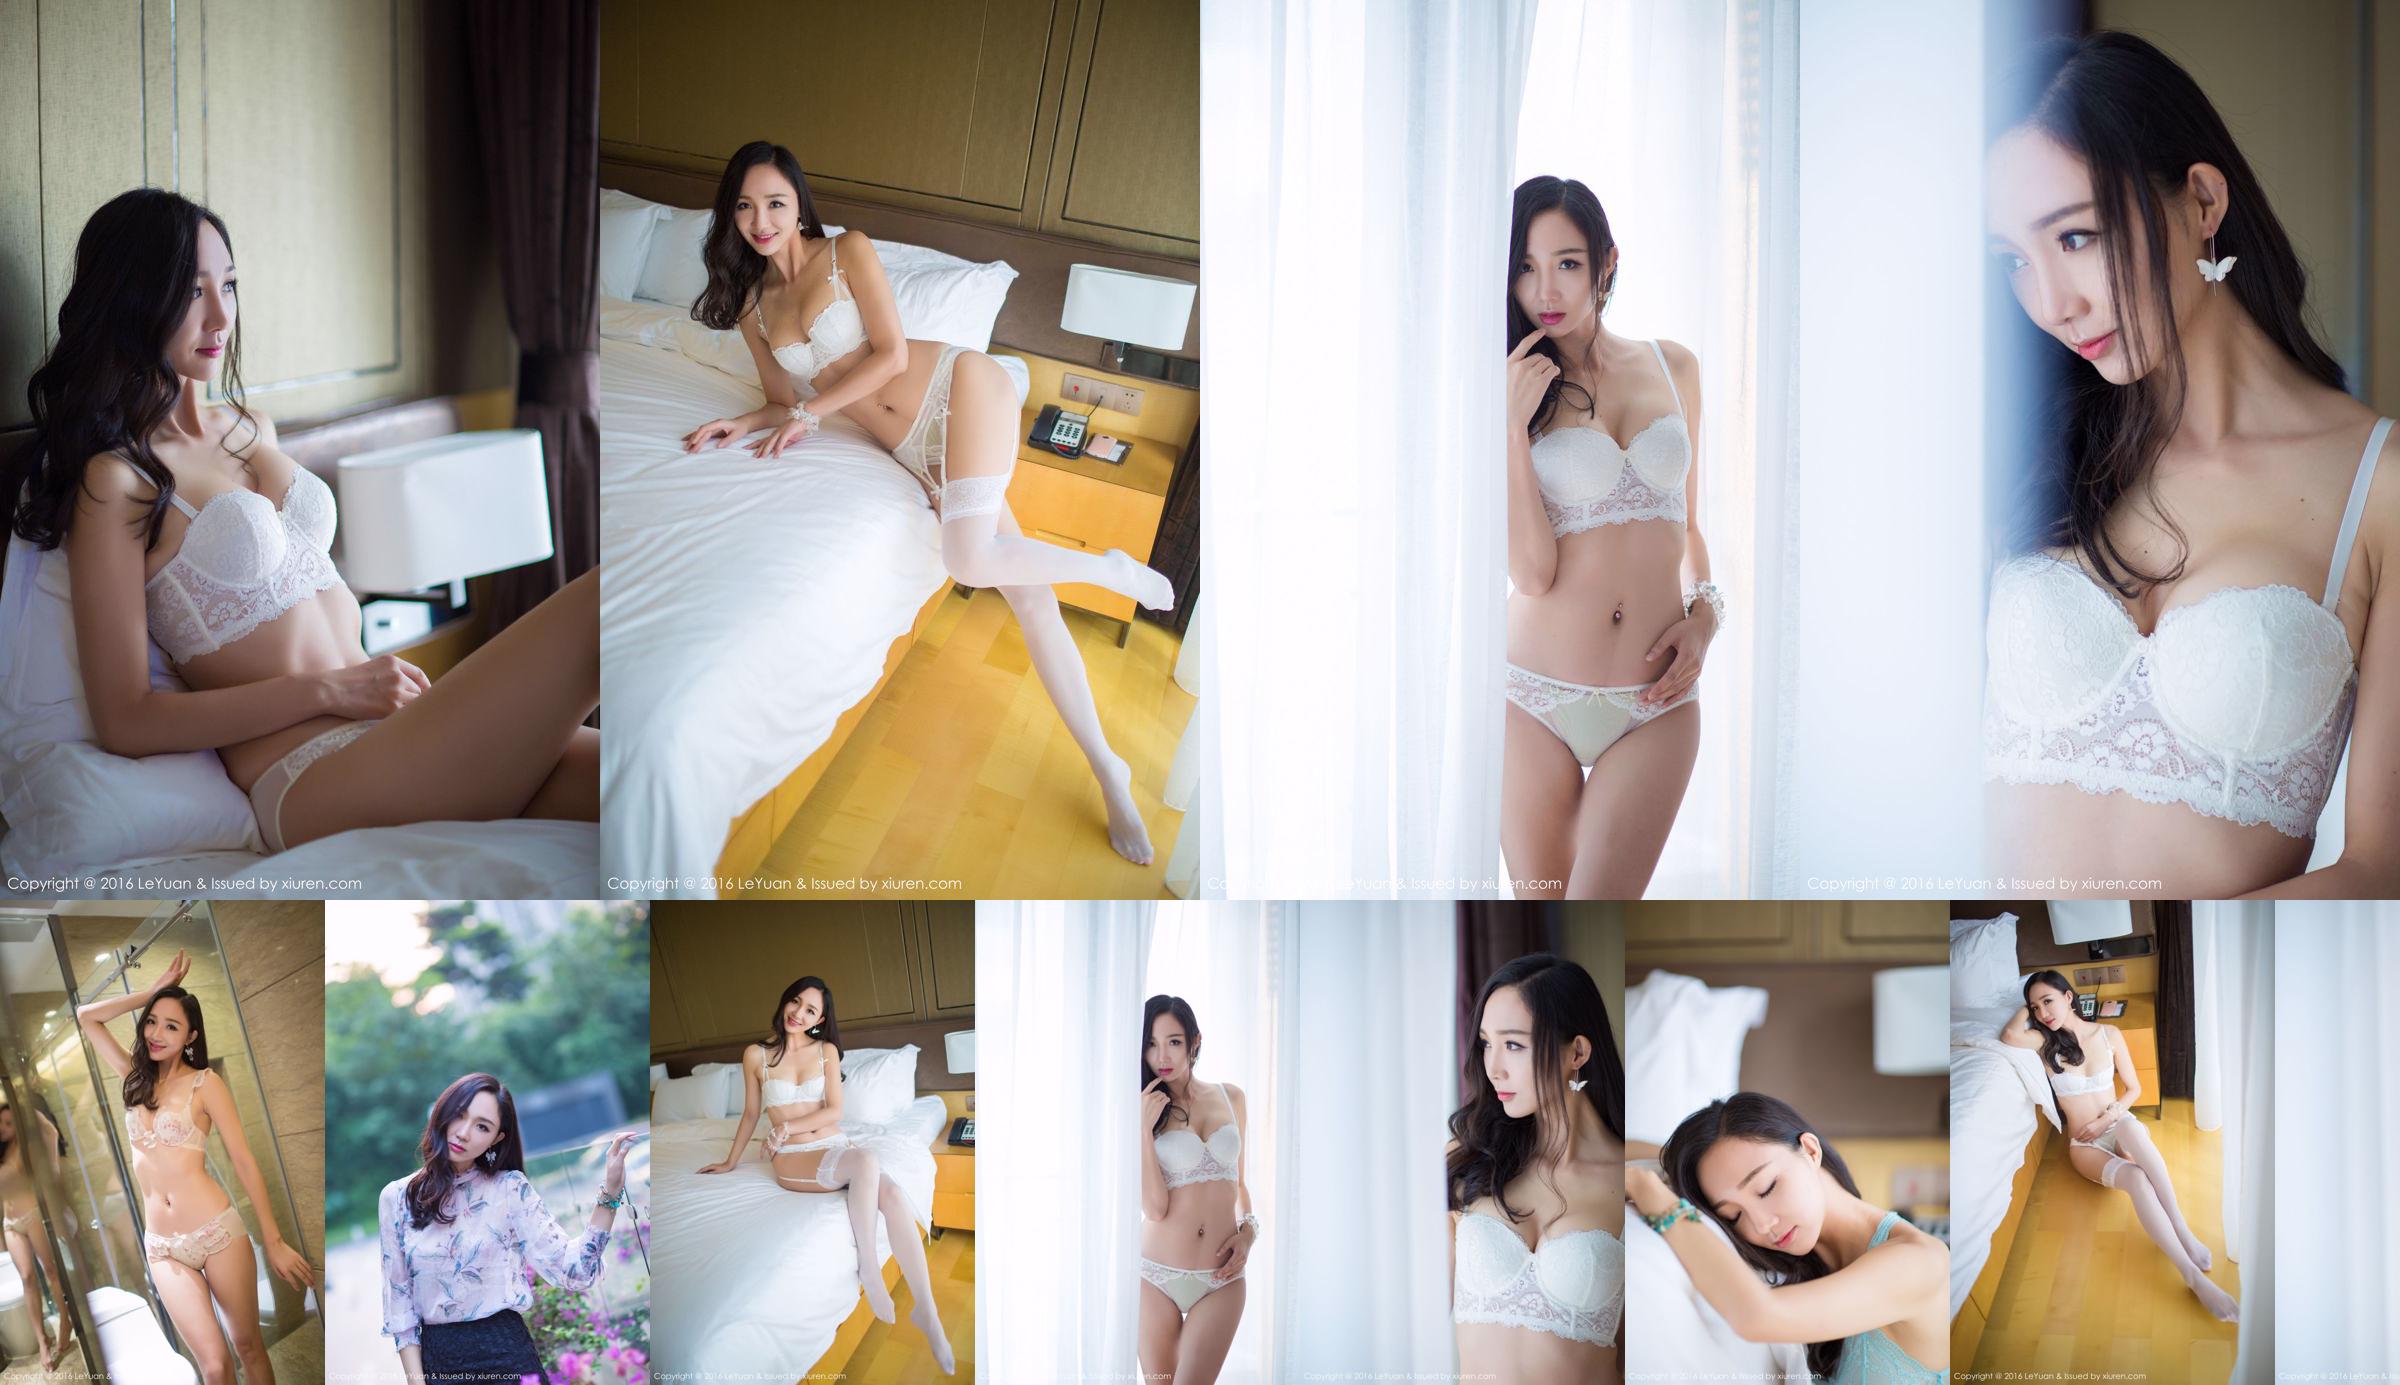 Beibei maggie "Longues belles jambes, grande figure gracieuse" [Star Paradise LeYuan] Vol.009 No.b76049 Page 7